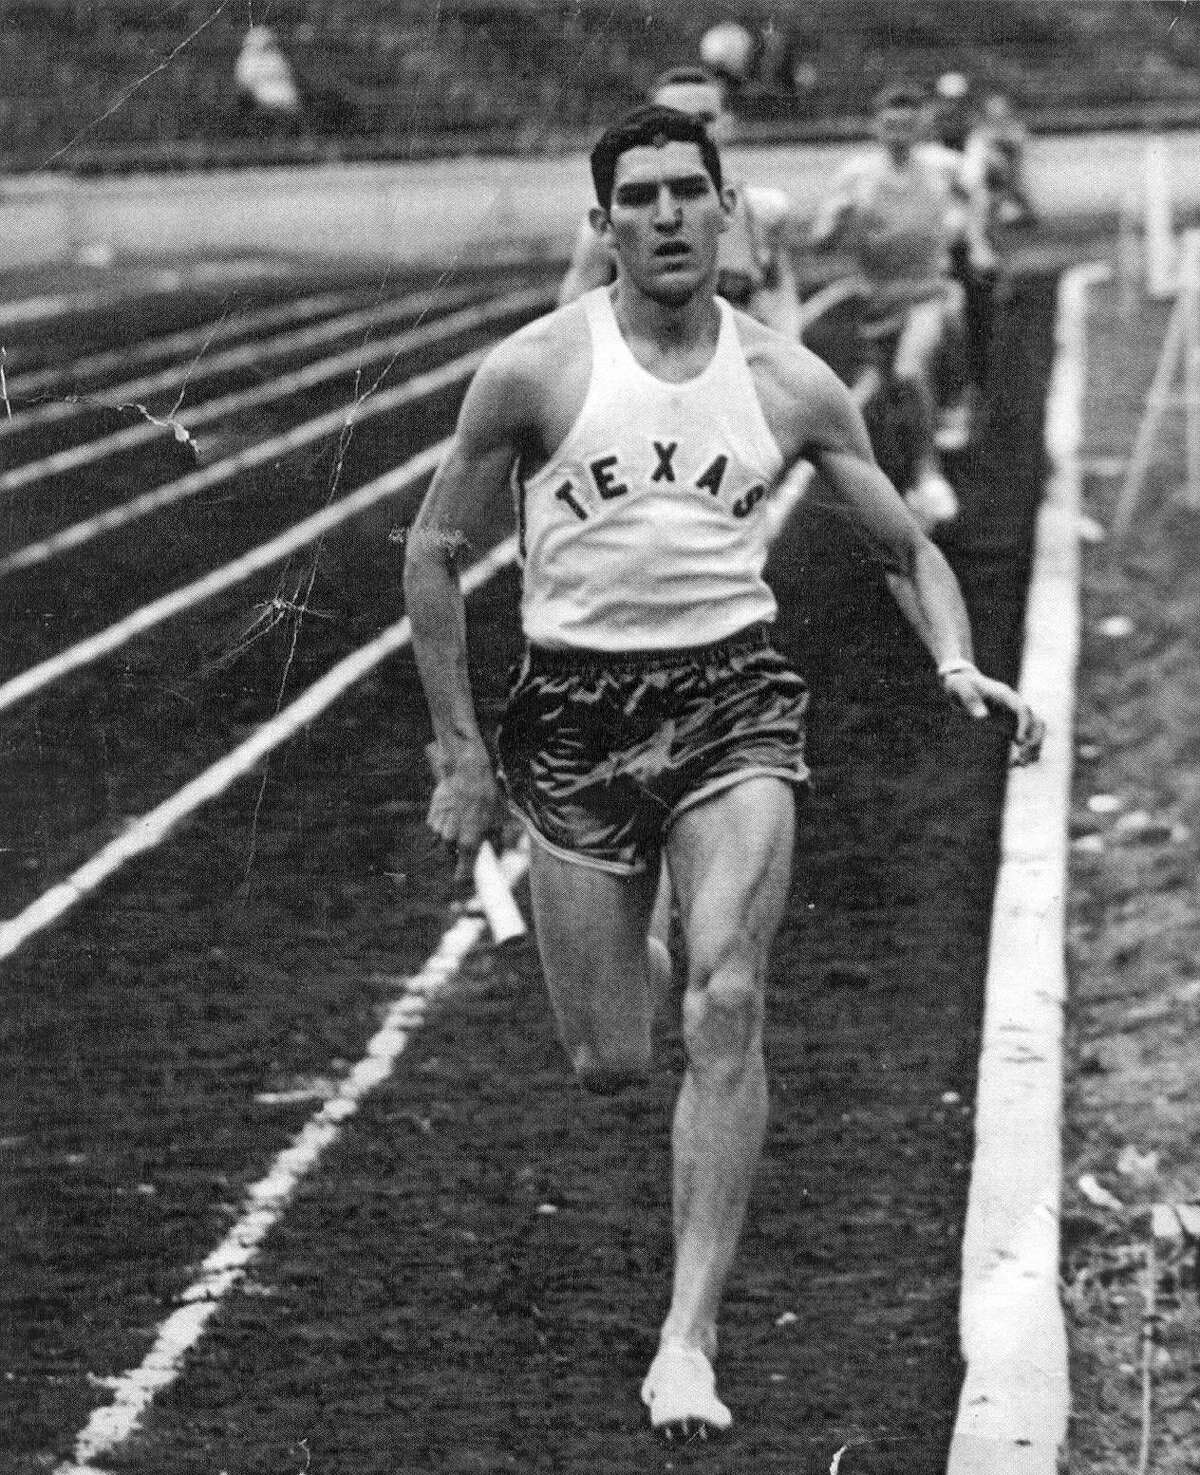 Ricardo Romo was a standout track and field athlete at the University of Texas in the early 1960s. PHOTO SPECIAL TO THE EXPRESS-NEWS